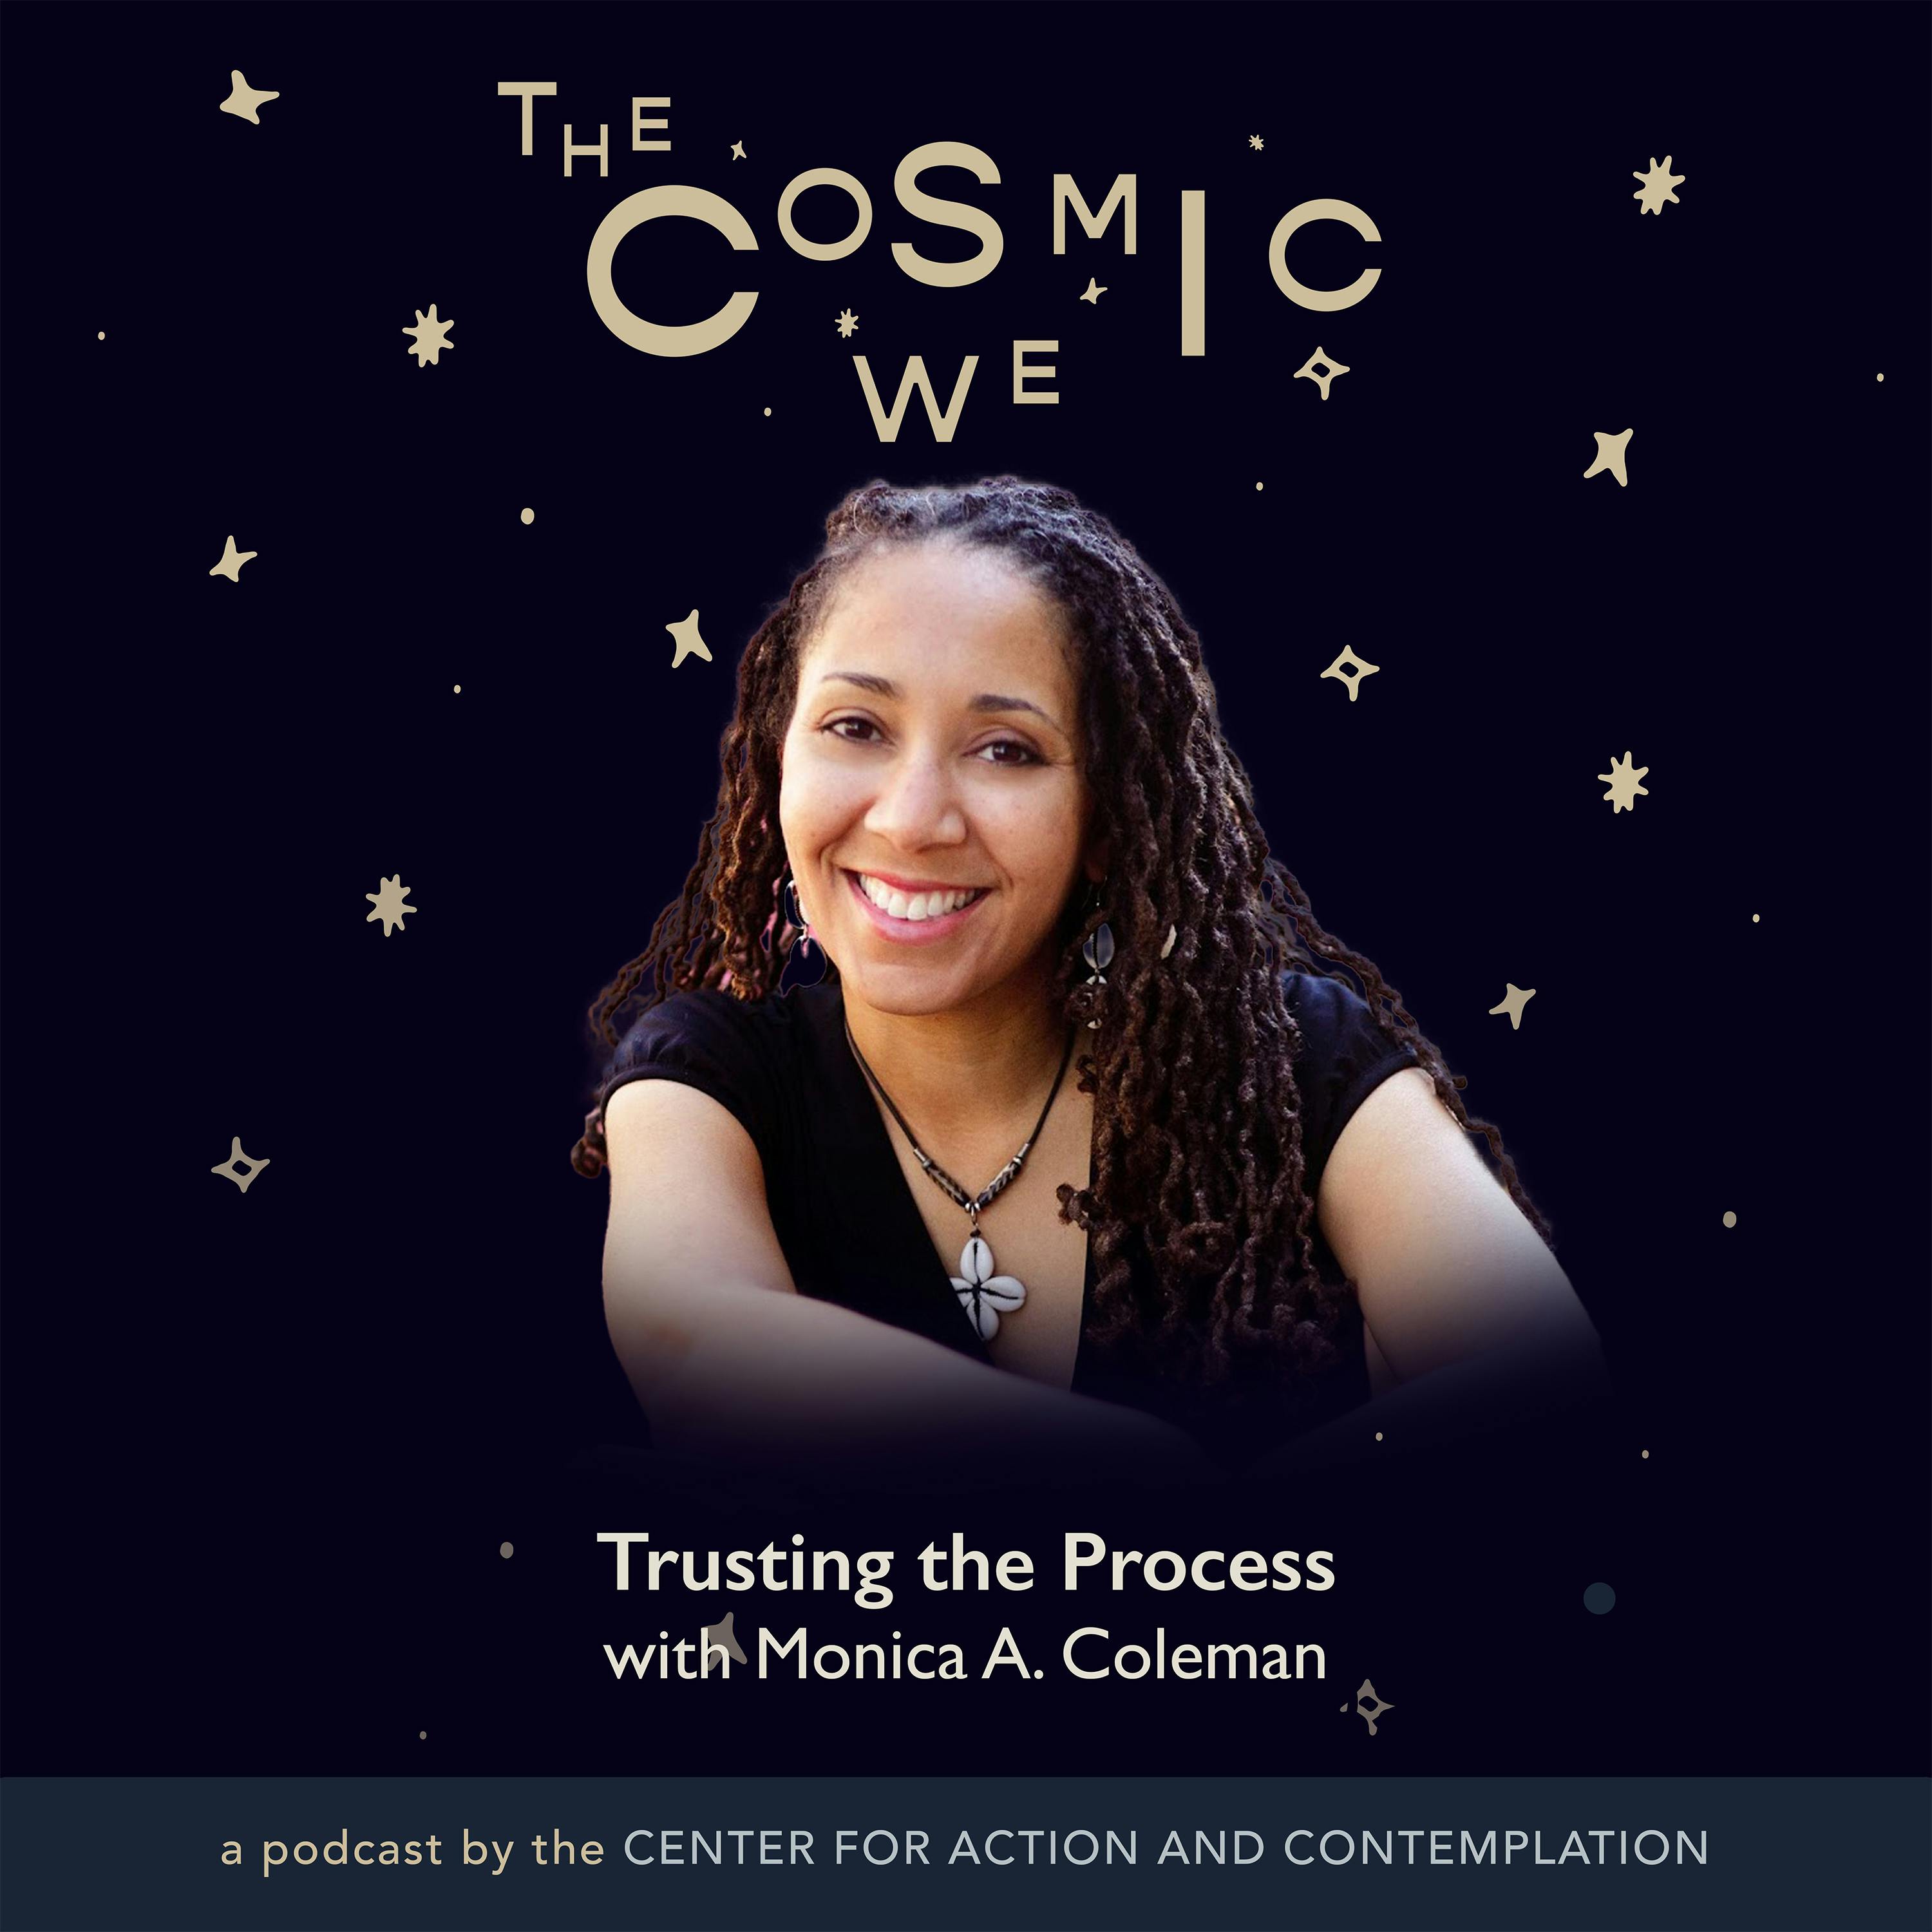 Trusting the Process with Monica A. Coleman